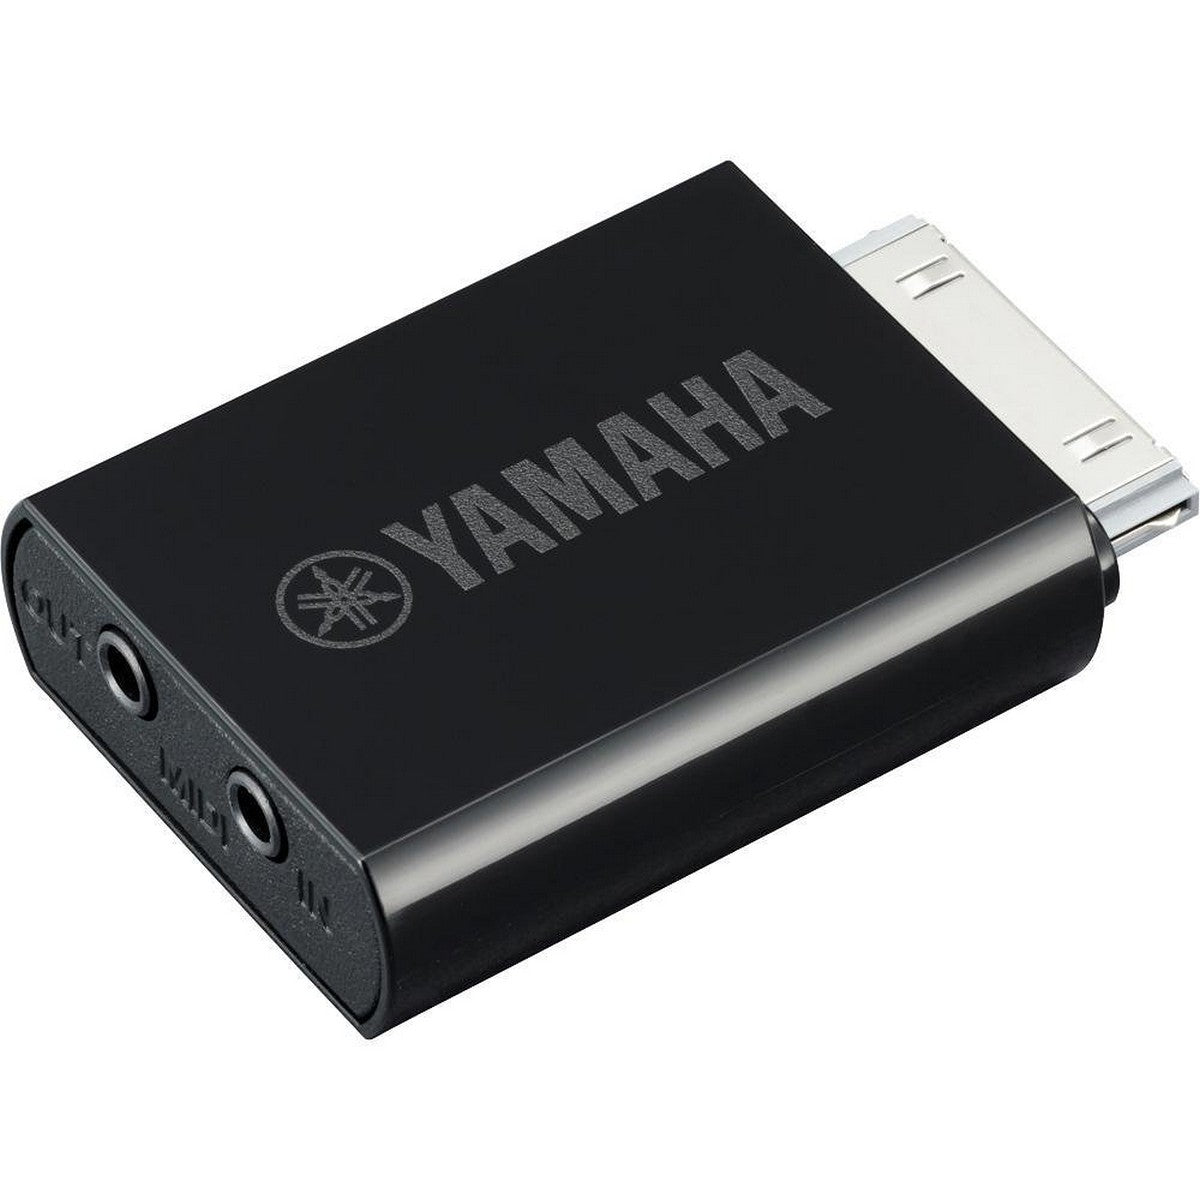 Yamaha i-MX1 | MIDI Interface Cable for iPhone/iPad That Connects Any MIDI Devices to Any Core MIDI-Compatible App